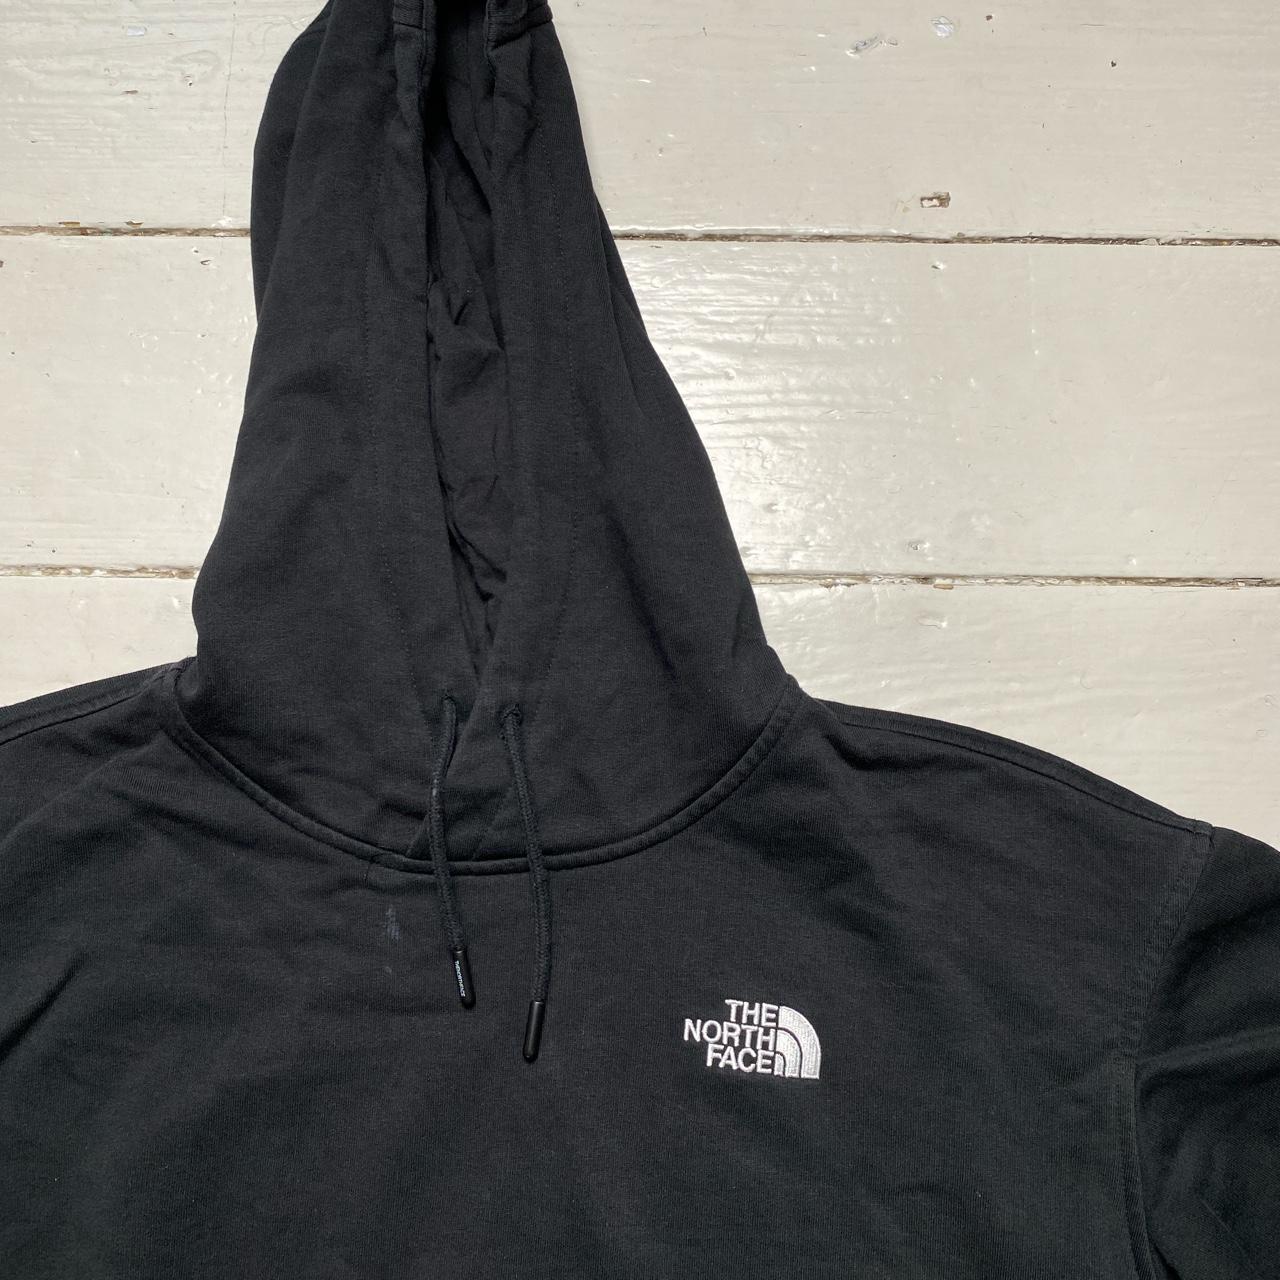 The North Face Black and White Unisex Hoodie